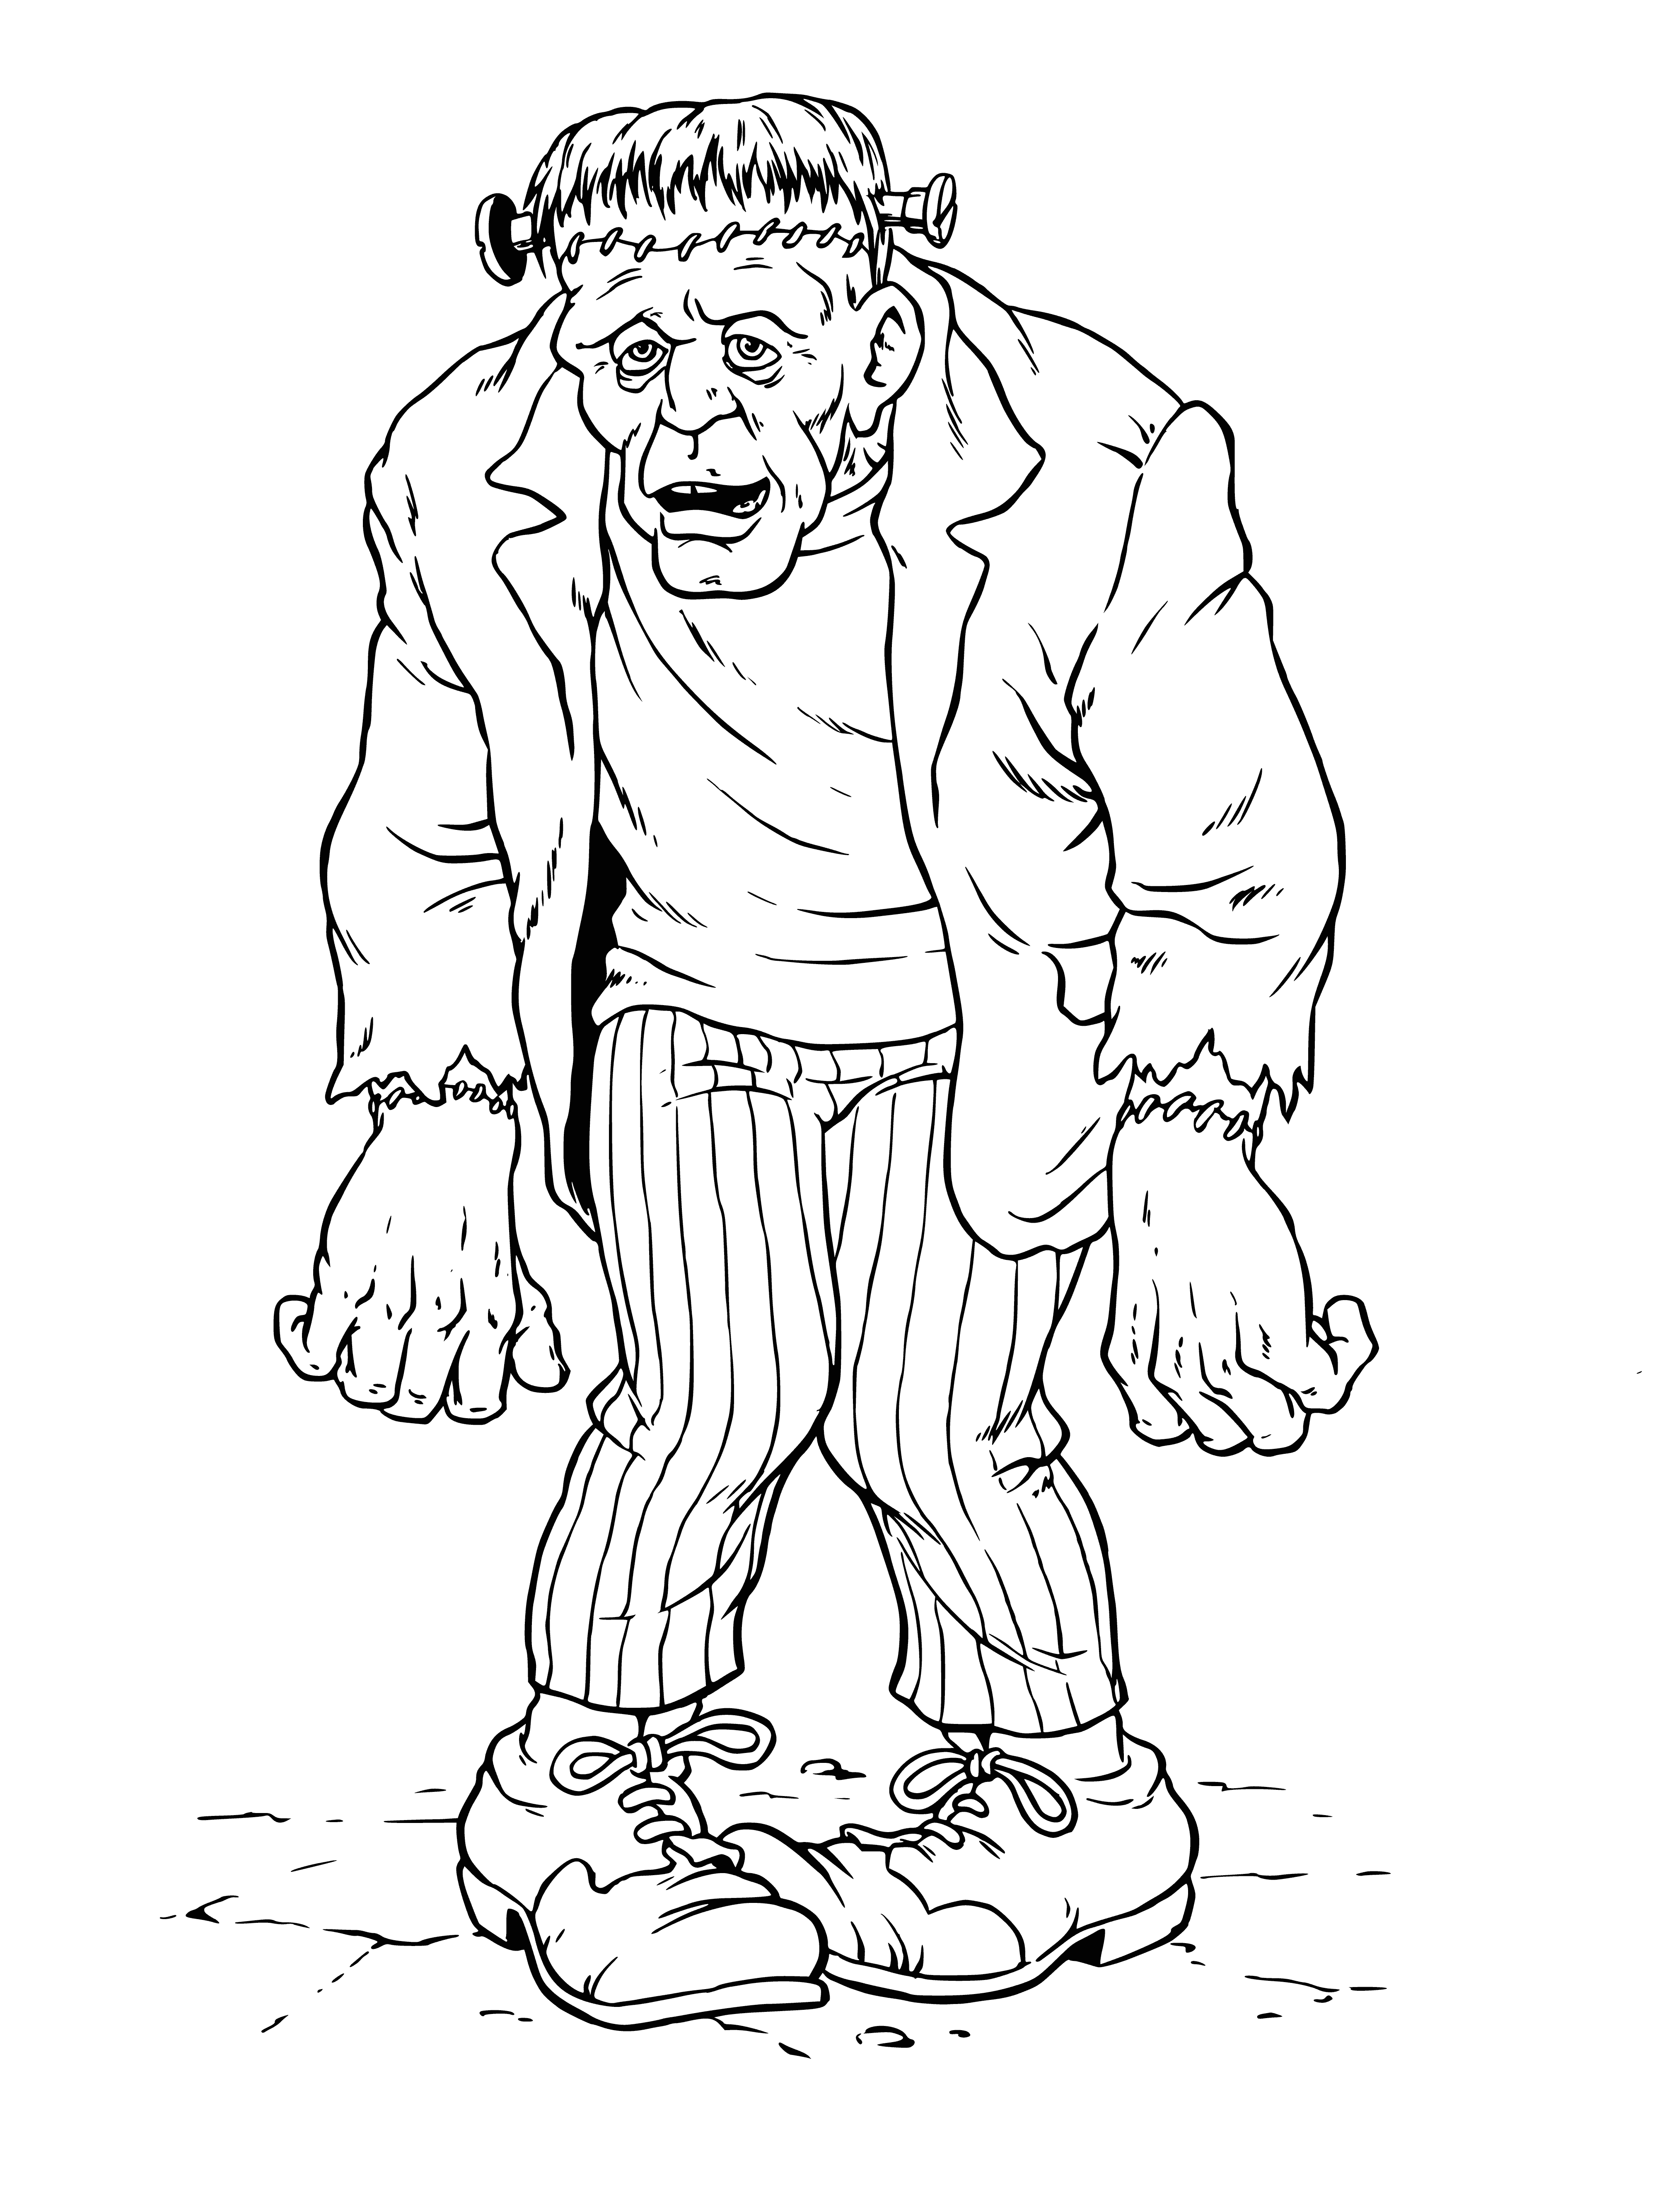 coloring page: Man stands outside castle, tattered black suit, stitches, scarred face, holds large club in hand.